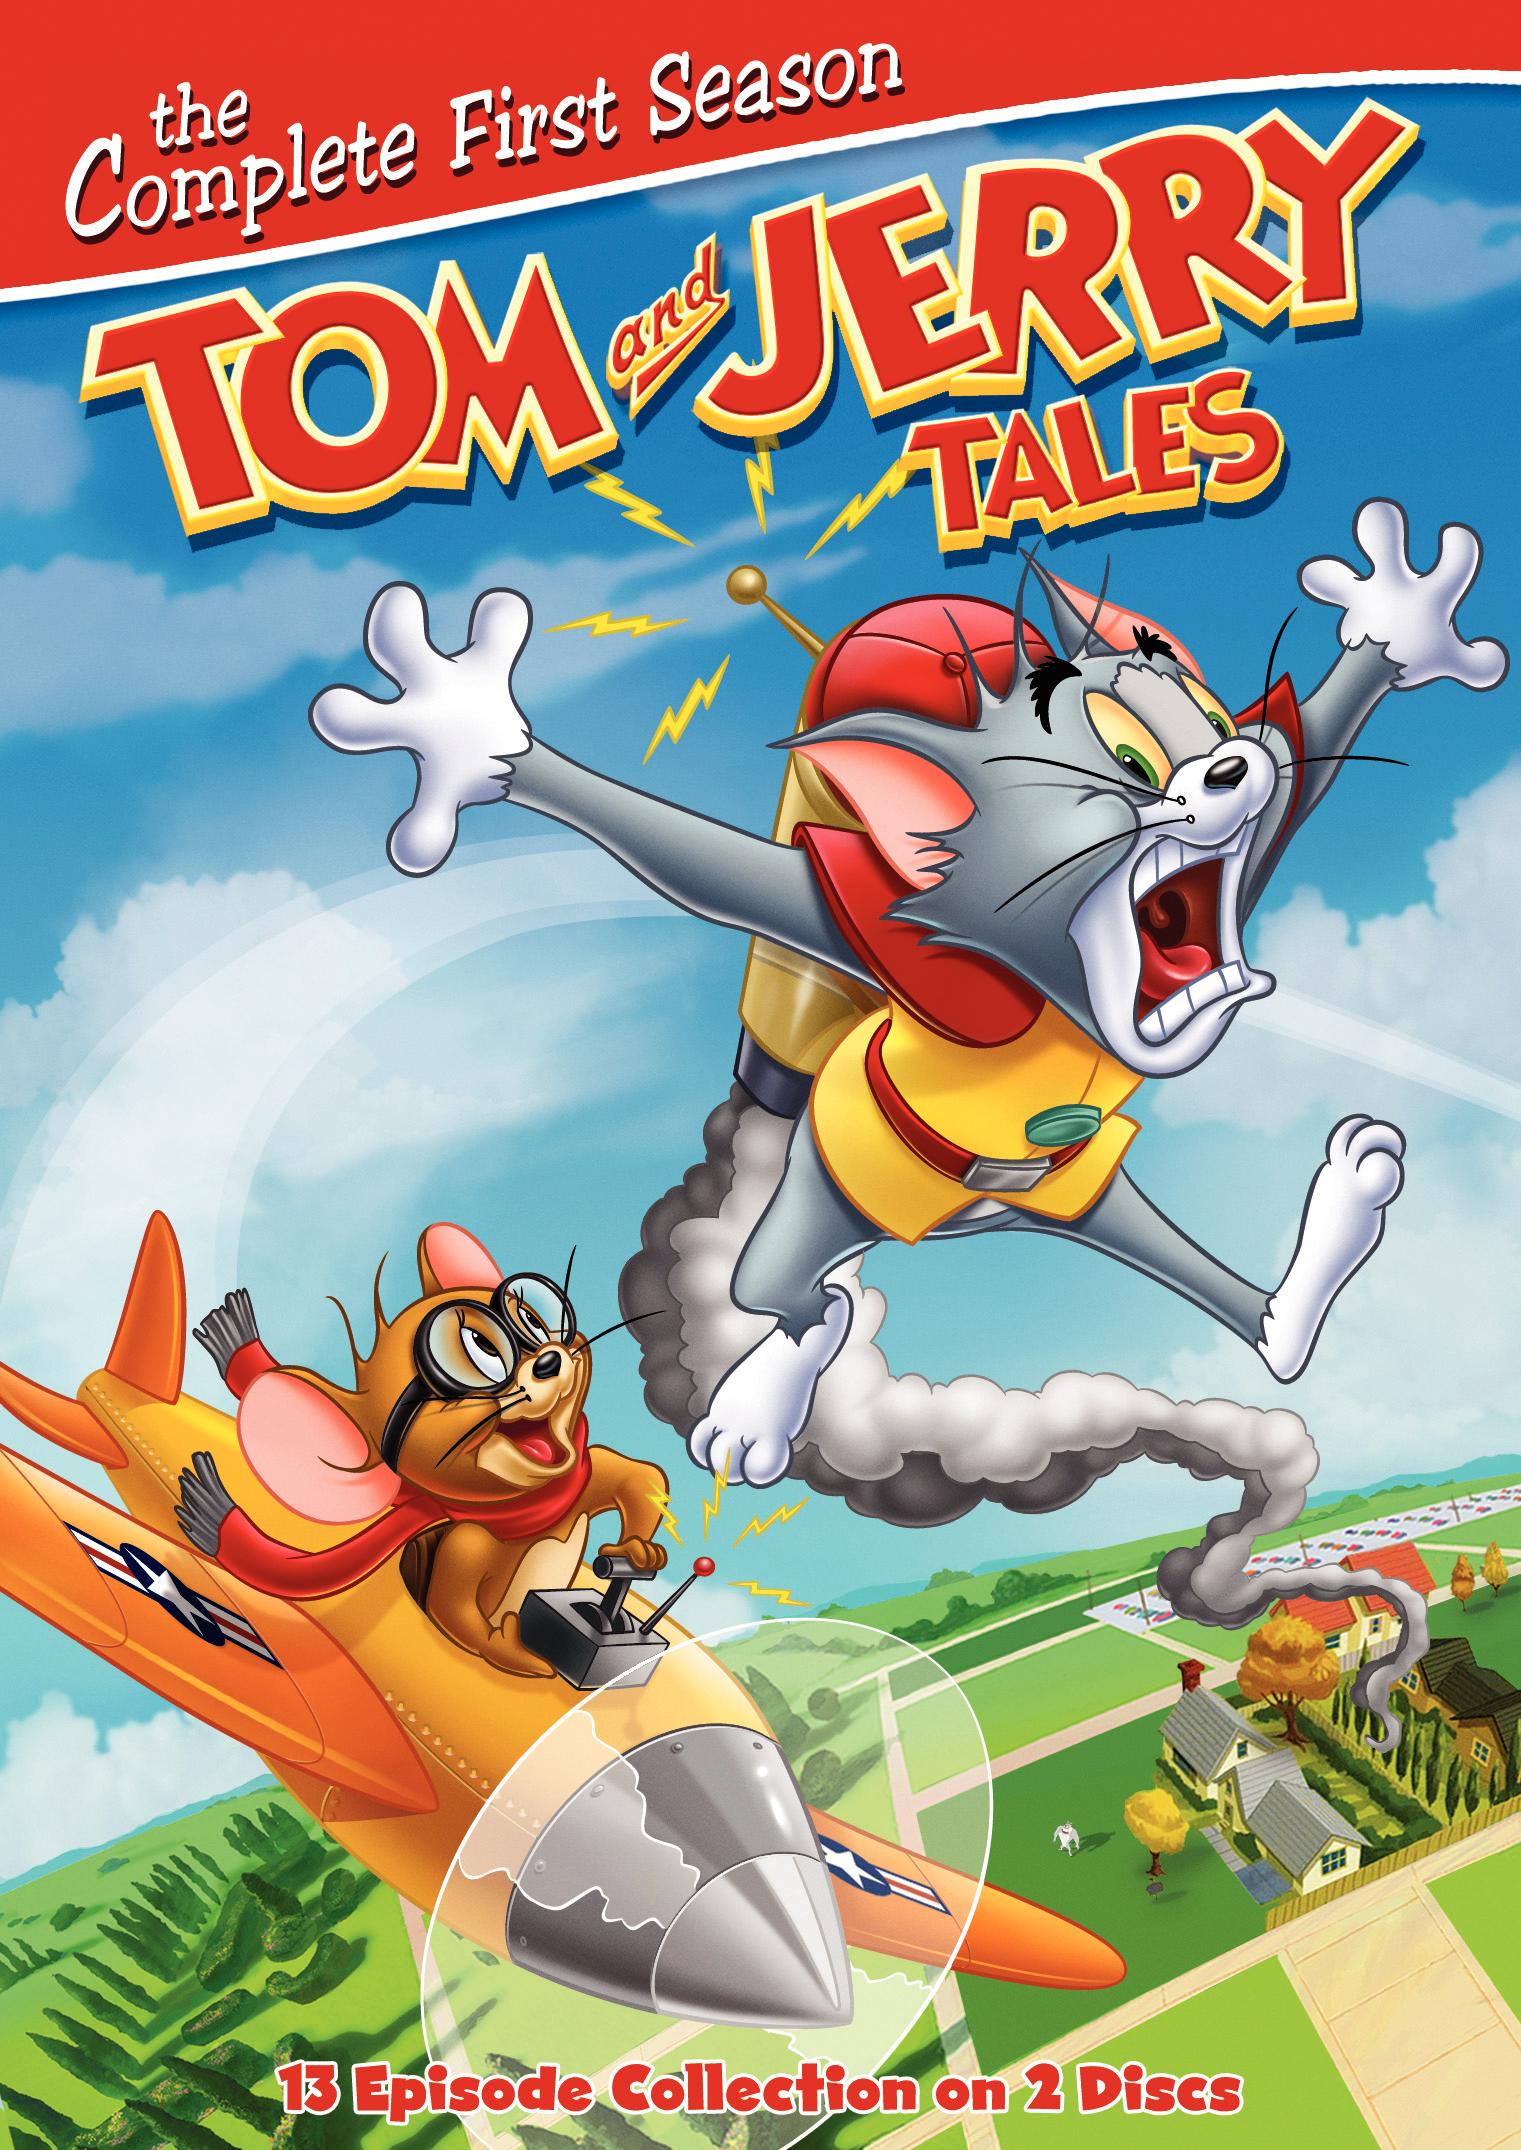 Tom And Jerry Tales Season DVD Review The Other View, 52% OFF